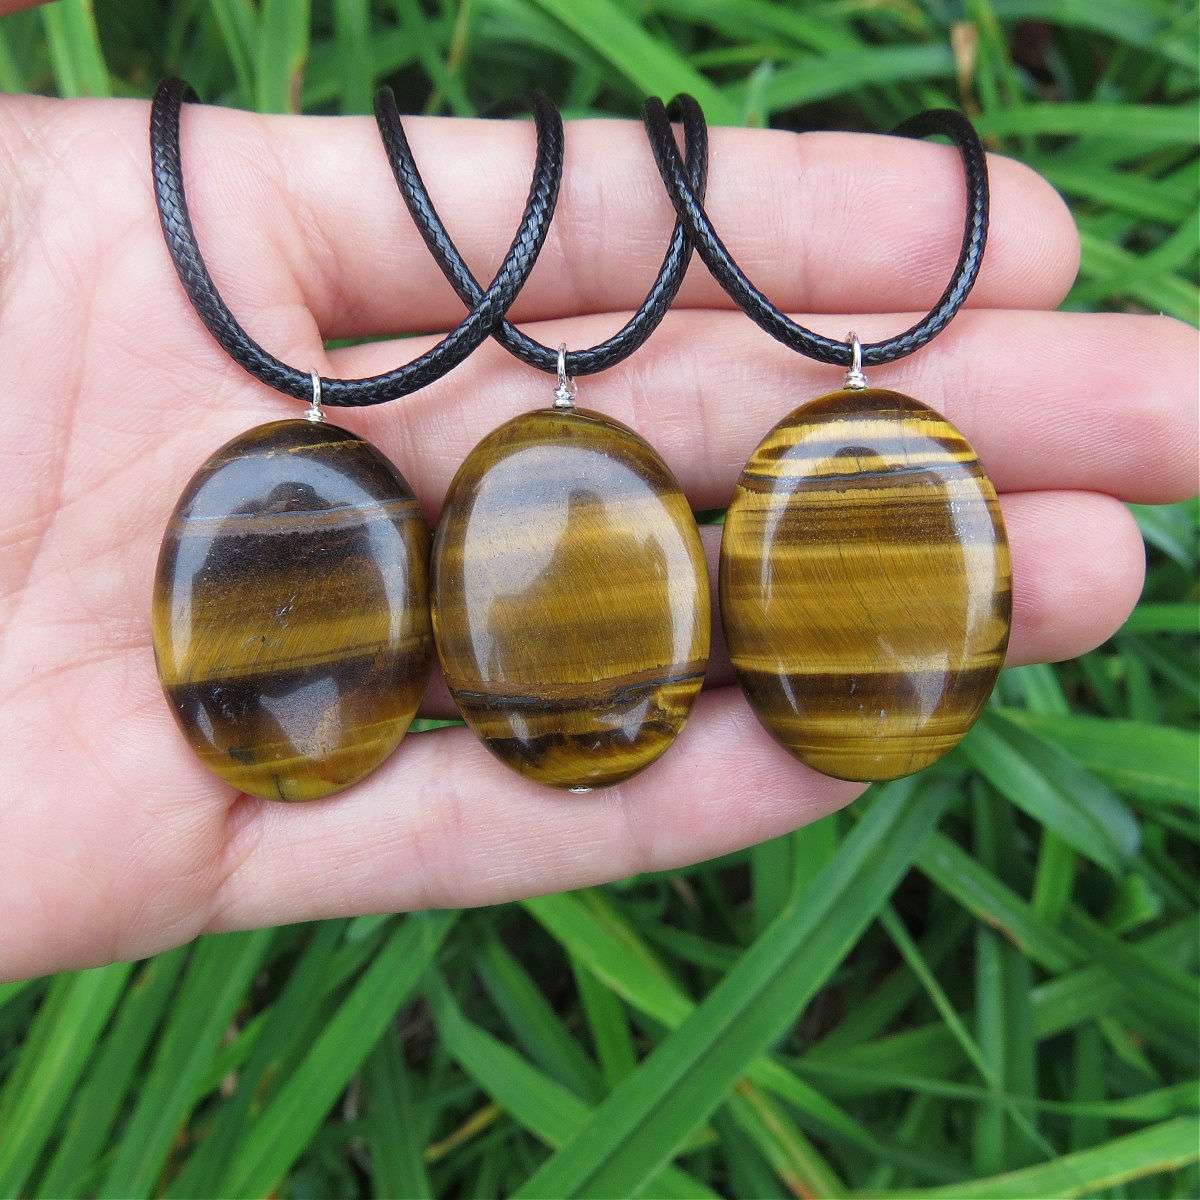 Large Tigers Eye Crystal Necklace - Black Cord Stone Necklace - Willpower, Confidence, Strength